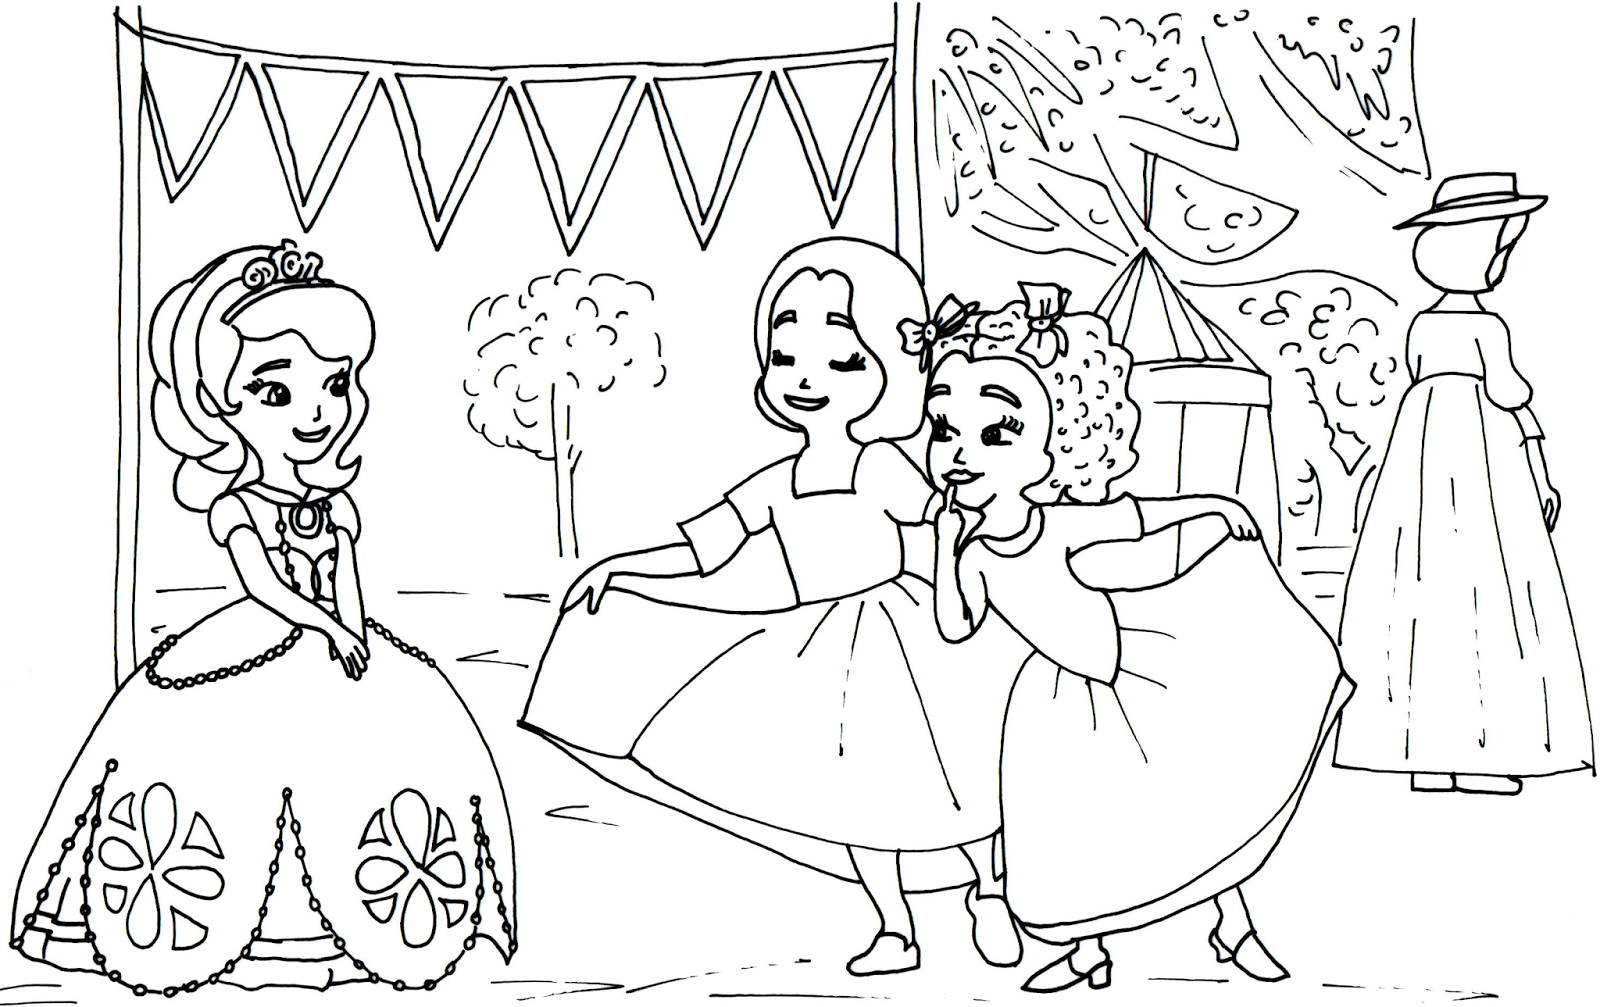 Sofia the First Coloring Pages - Best Coloring Pages For Kids